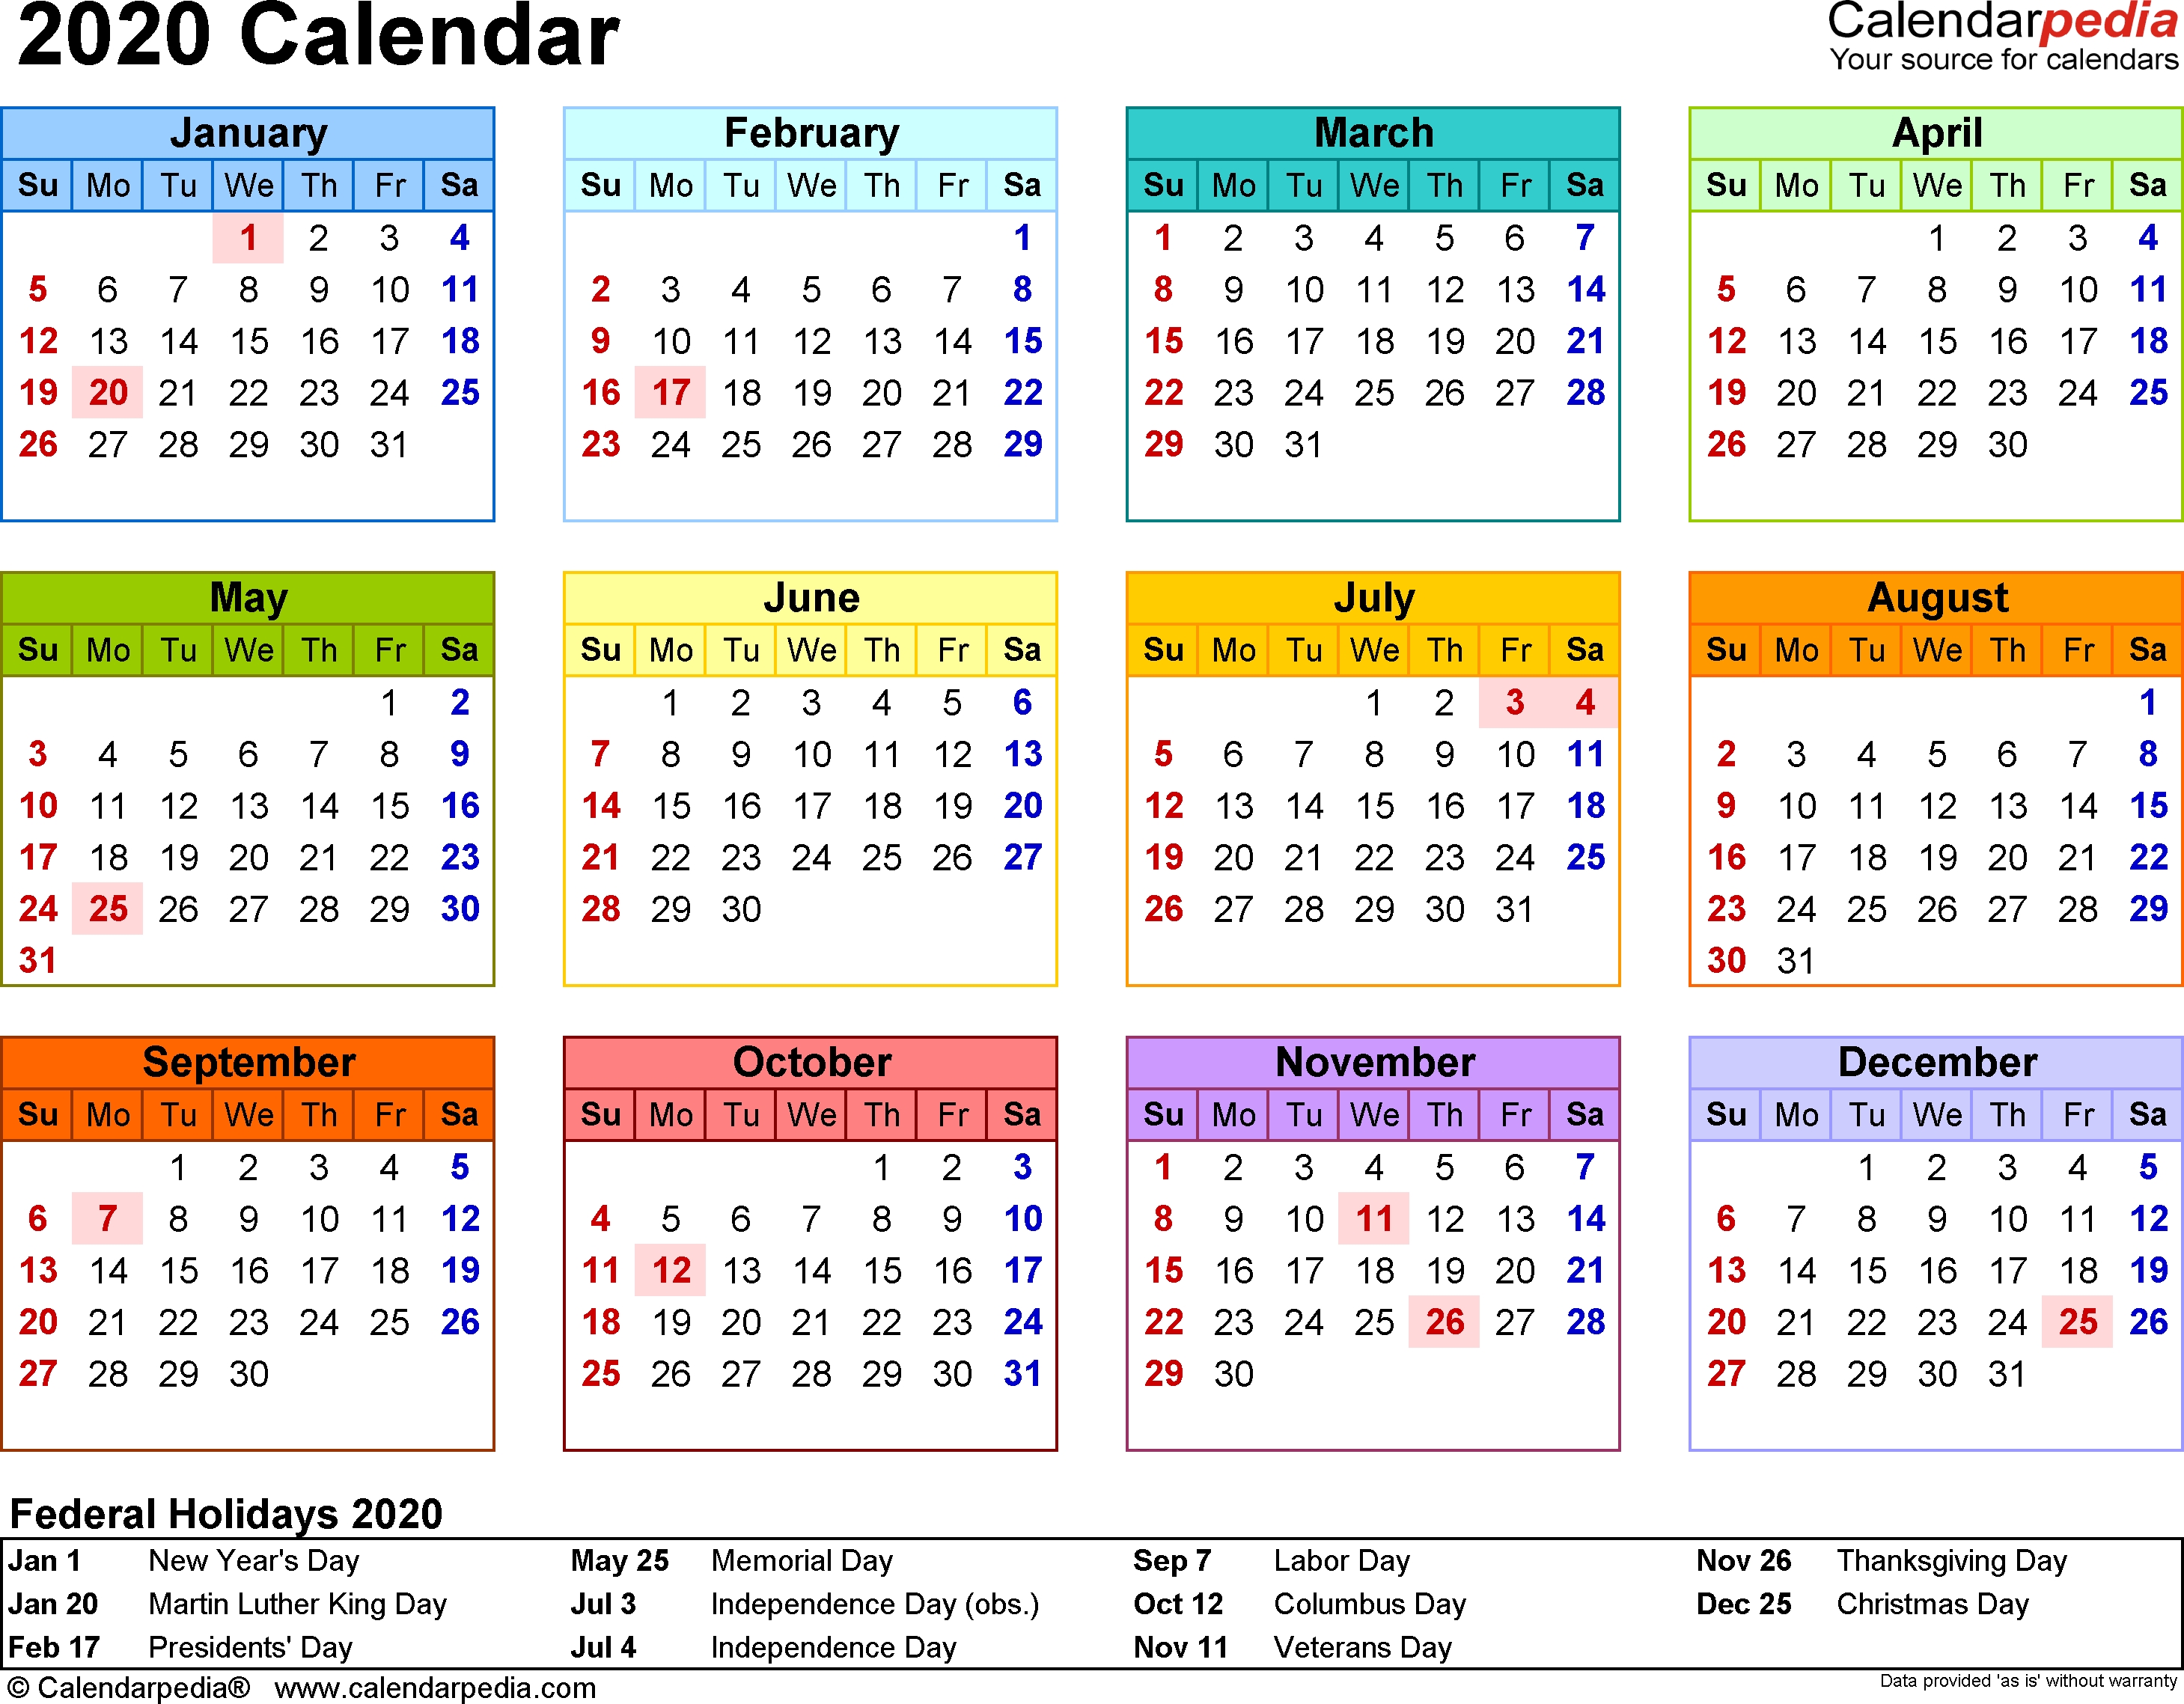 2020 Calendar - Free Printable Microsoft Word Templates Incredible Downloadable Monthly Planner For 2020 With Public Holidays For South Africa